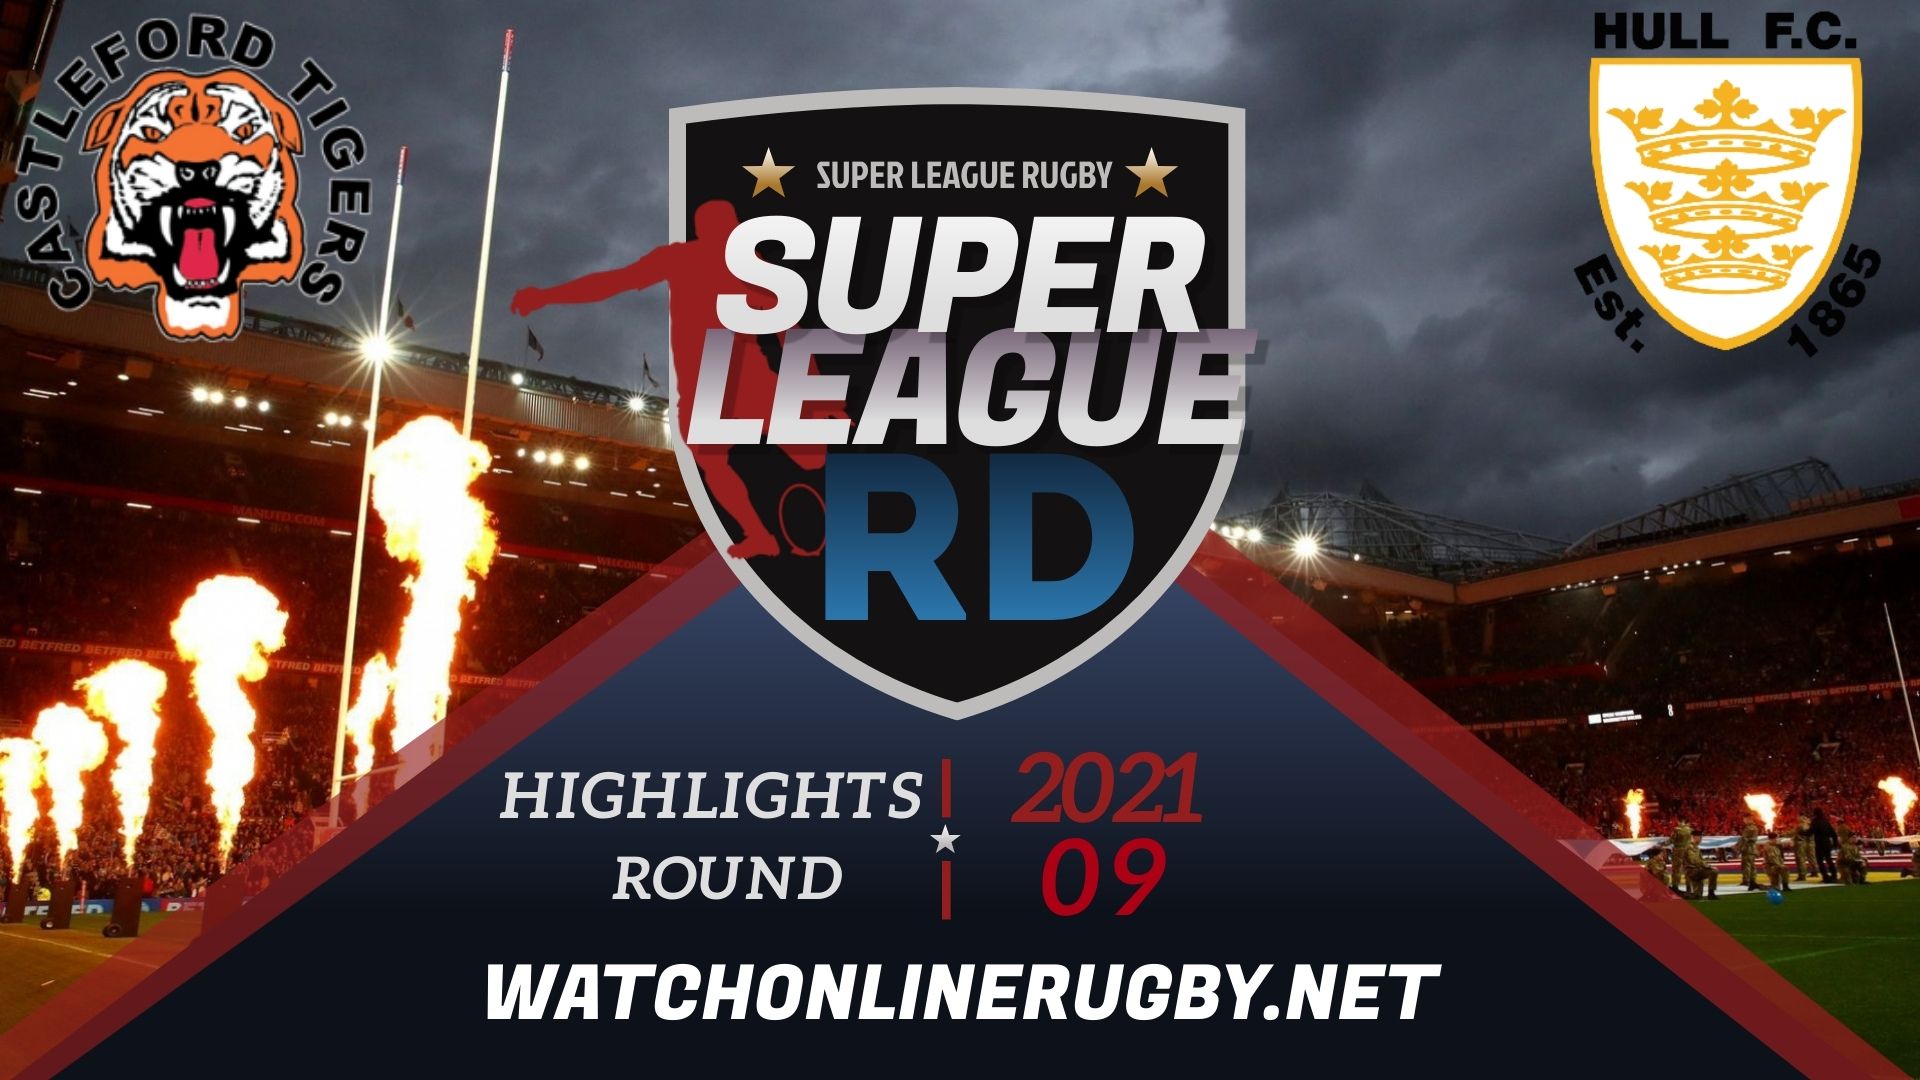 Castleford Tigers Vs Hull FC Super League Rugby 2021 RD 9